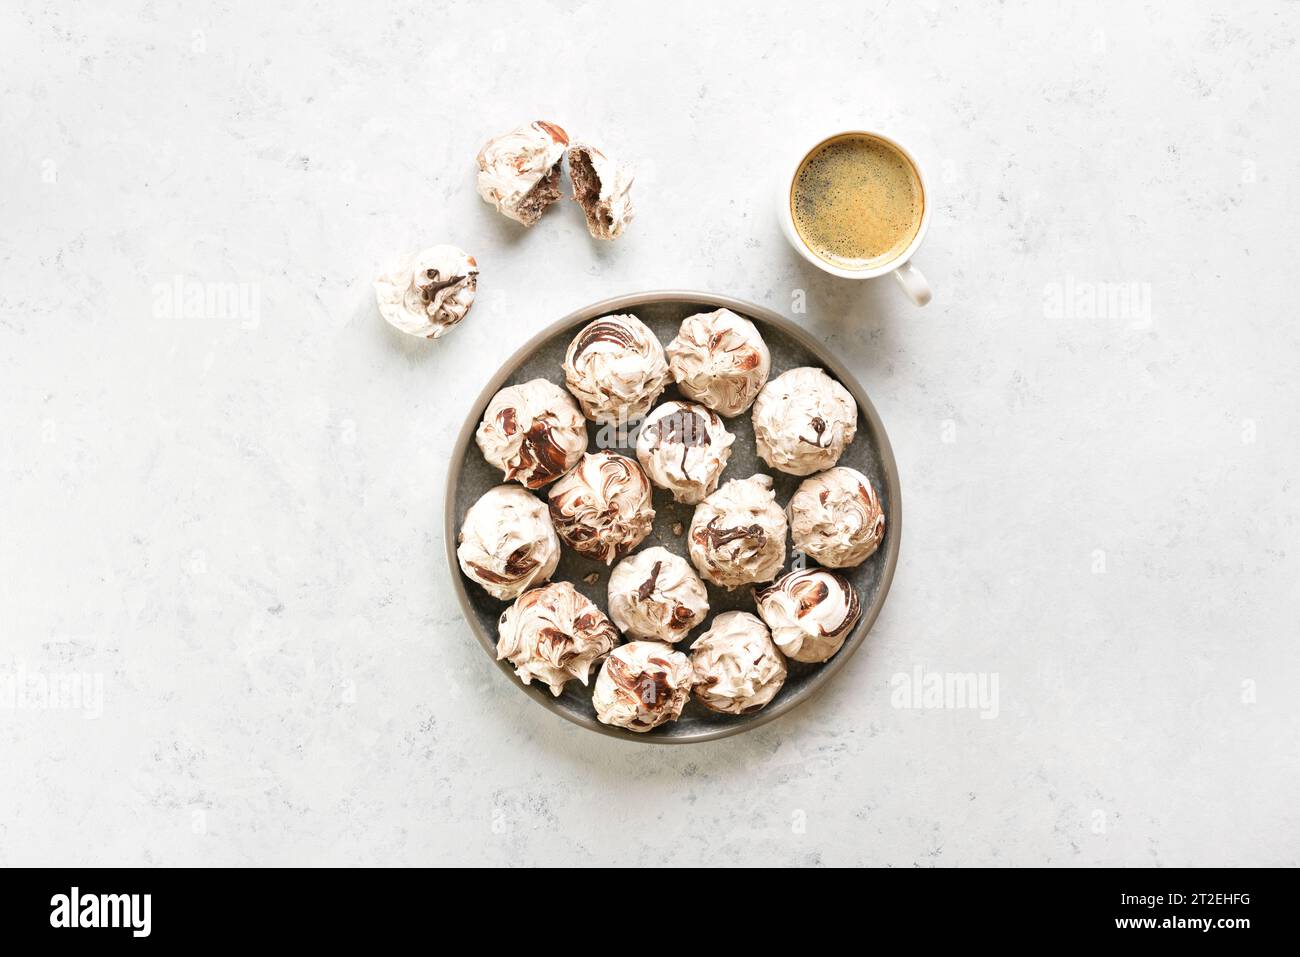 Chocolate meringue cookies and cup of coffee over light background with free space. Top view, flat lay Stock Photo